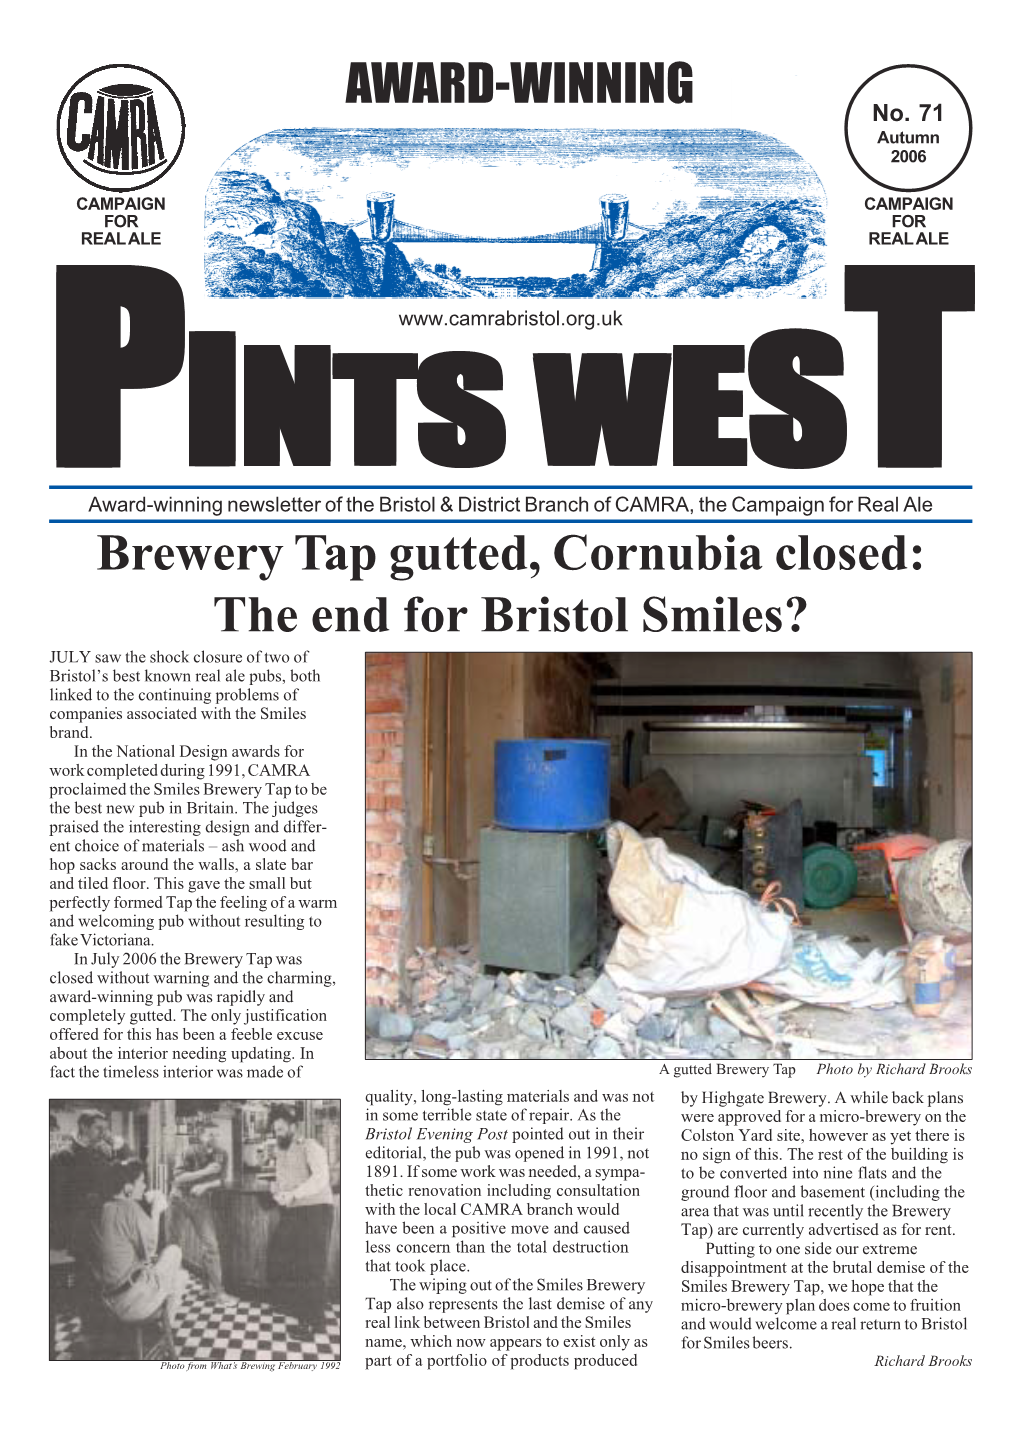 AWARD-WINNING Brewery Tap Gutted, Cornubia Closed: the End